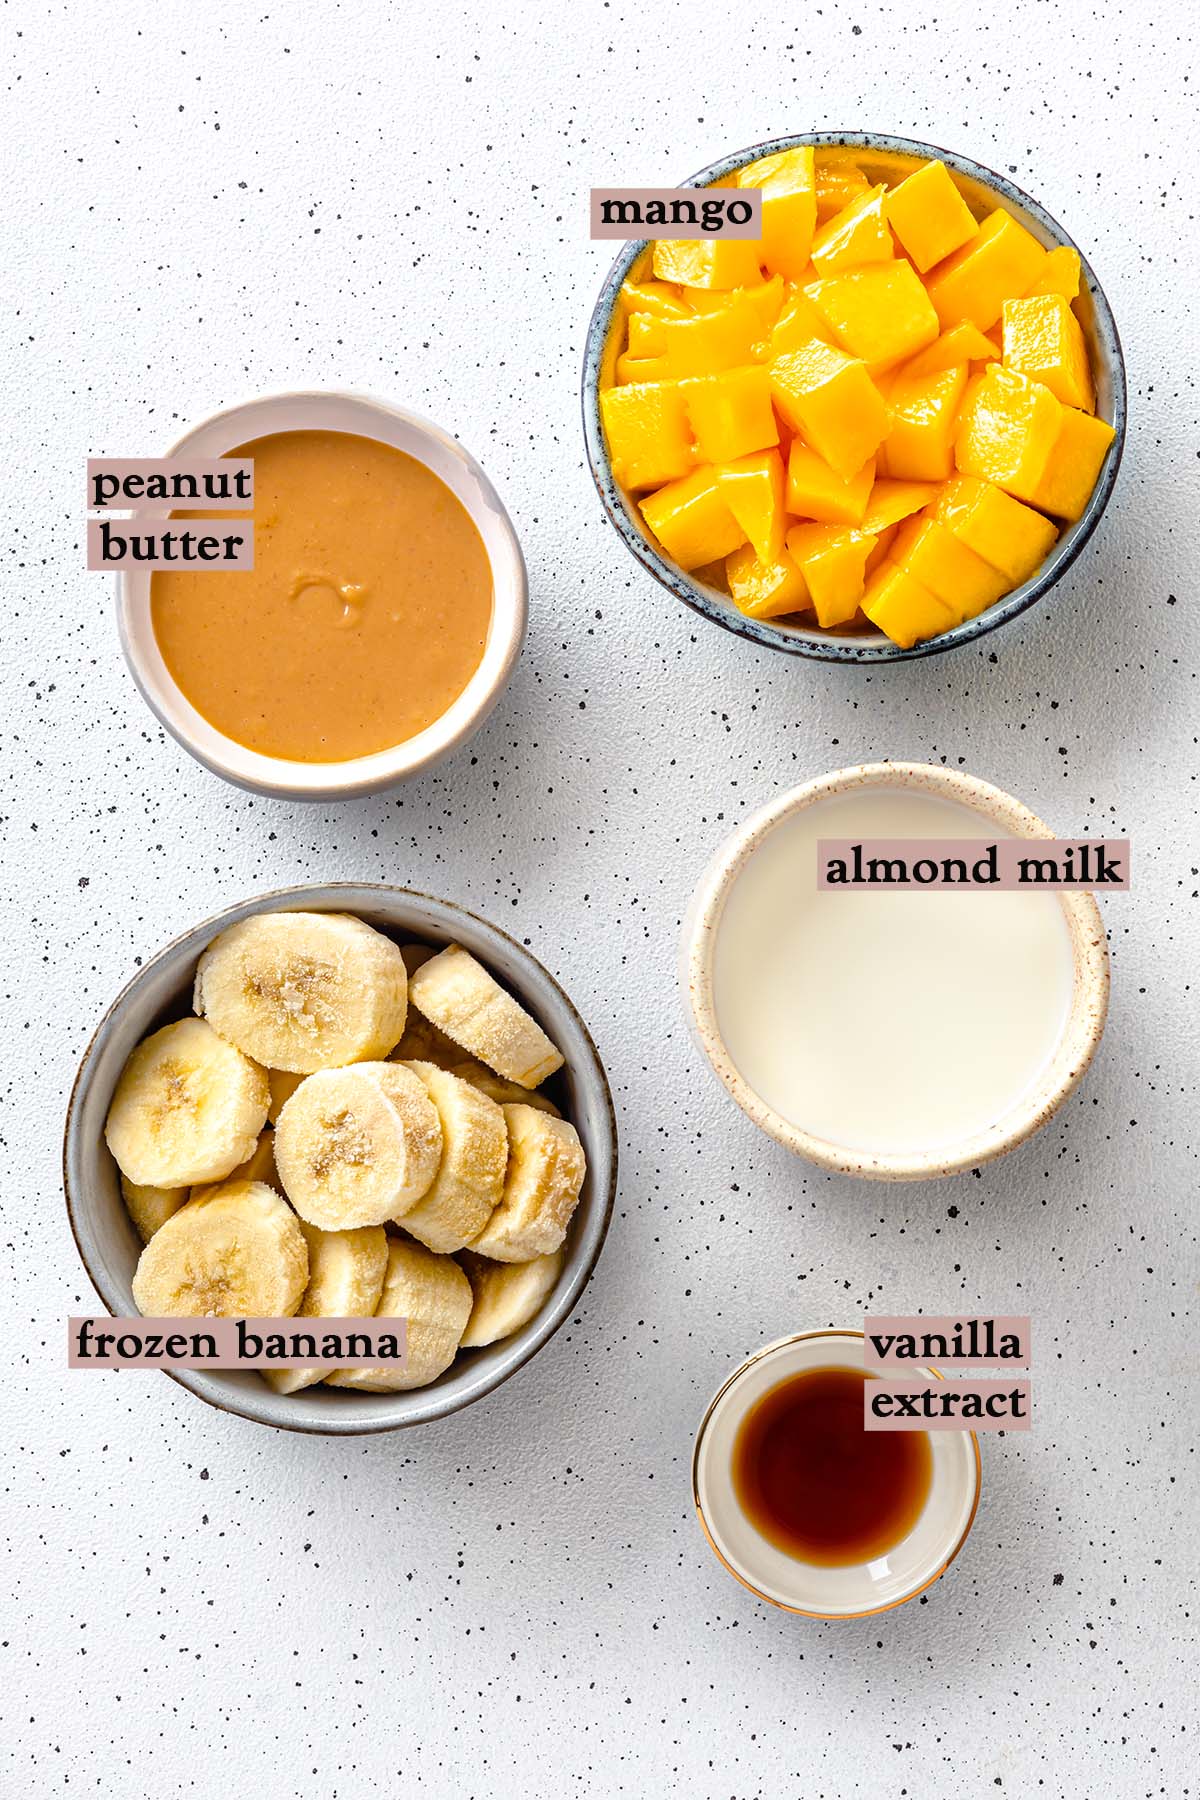 Ingredients for mango peanut butter smoothie